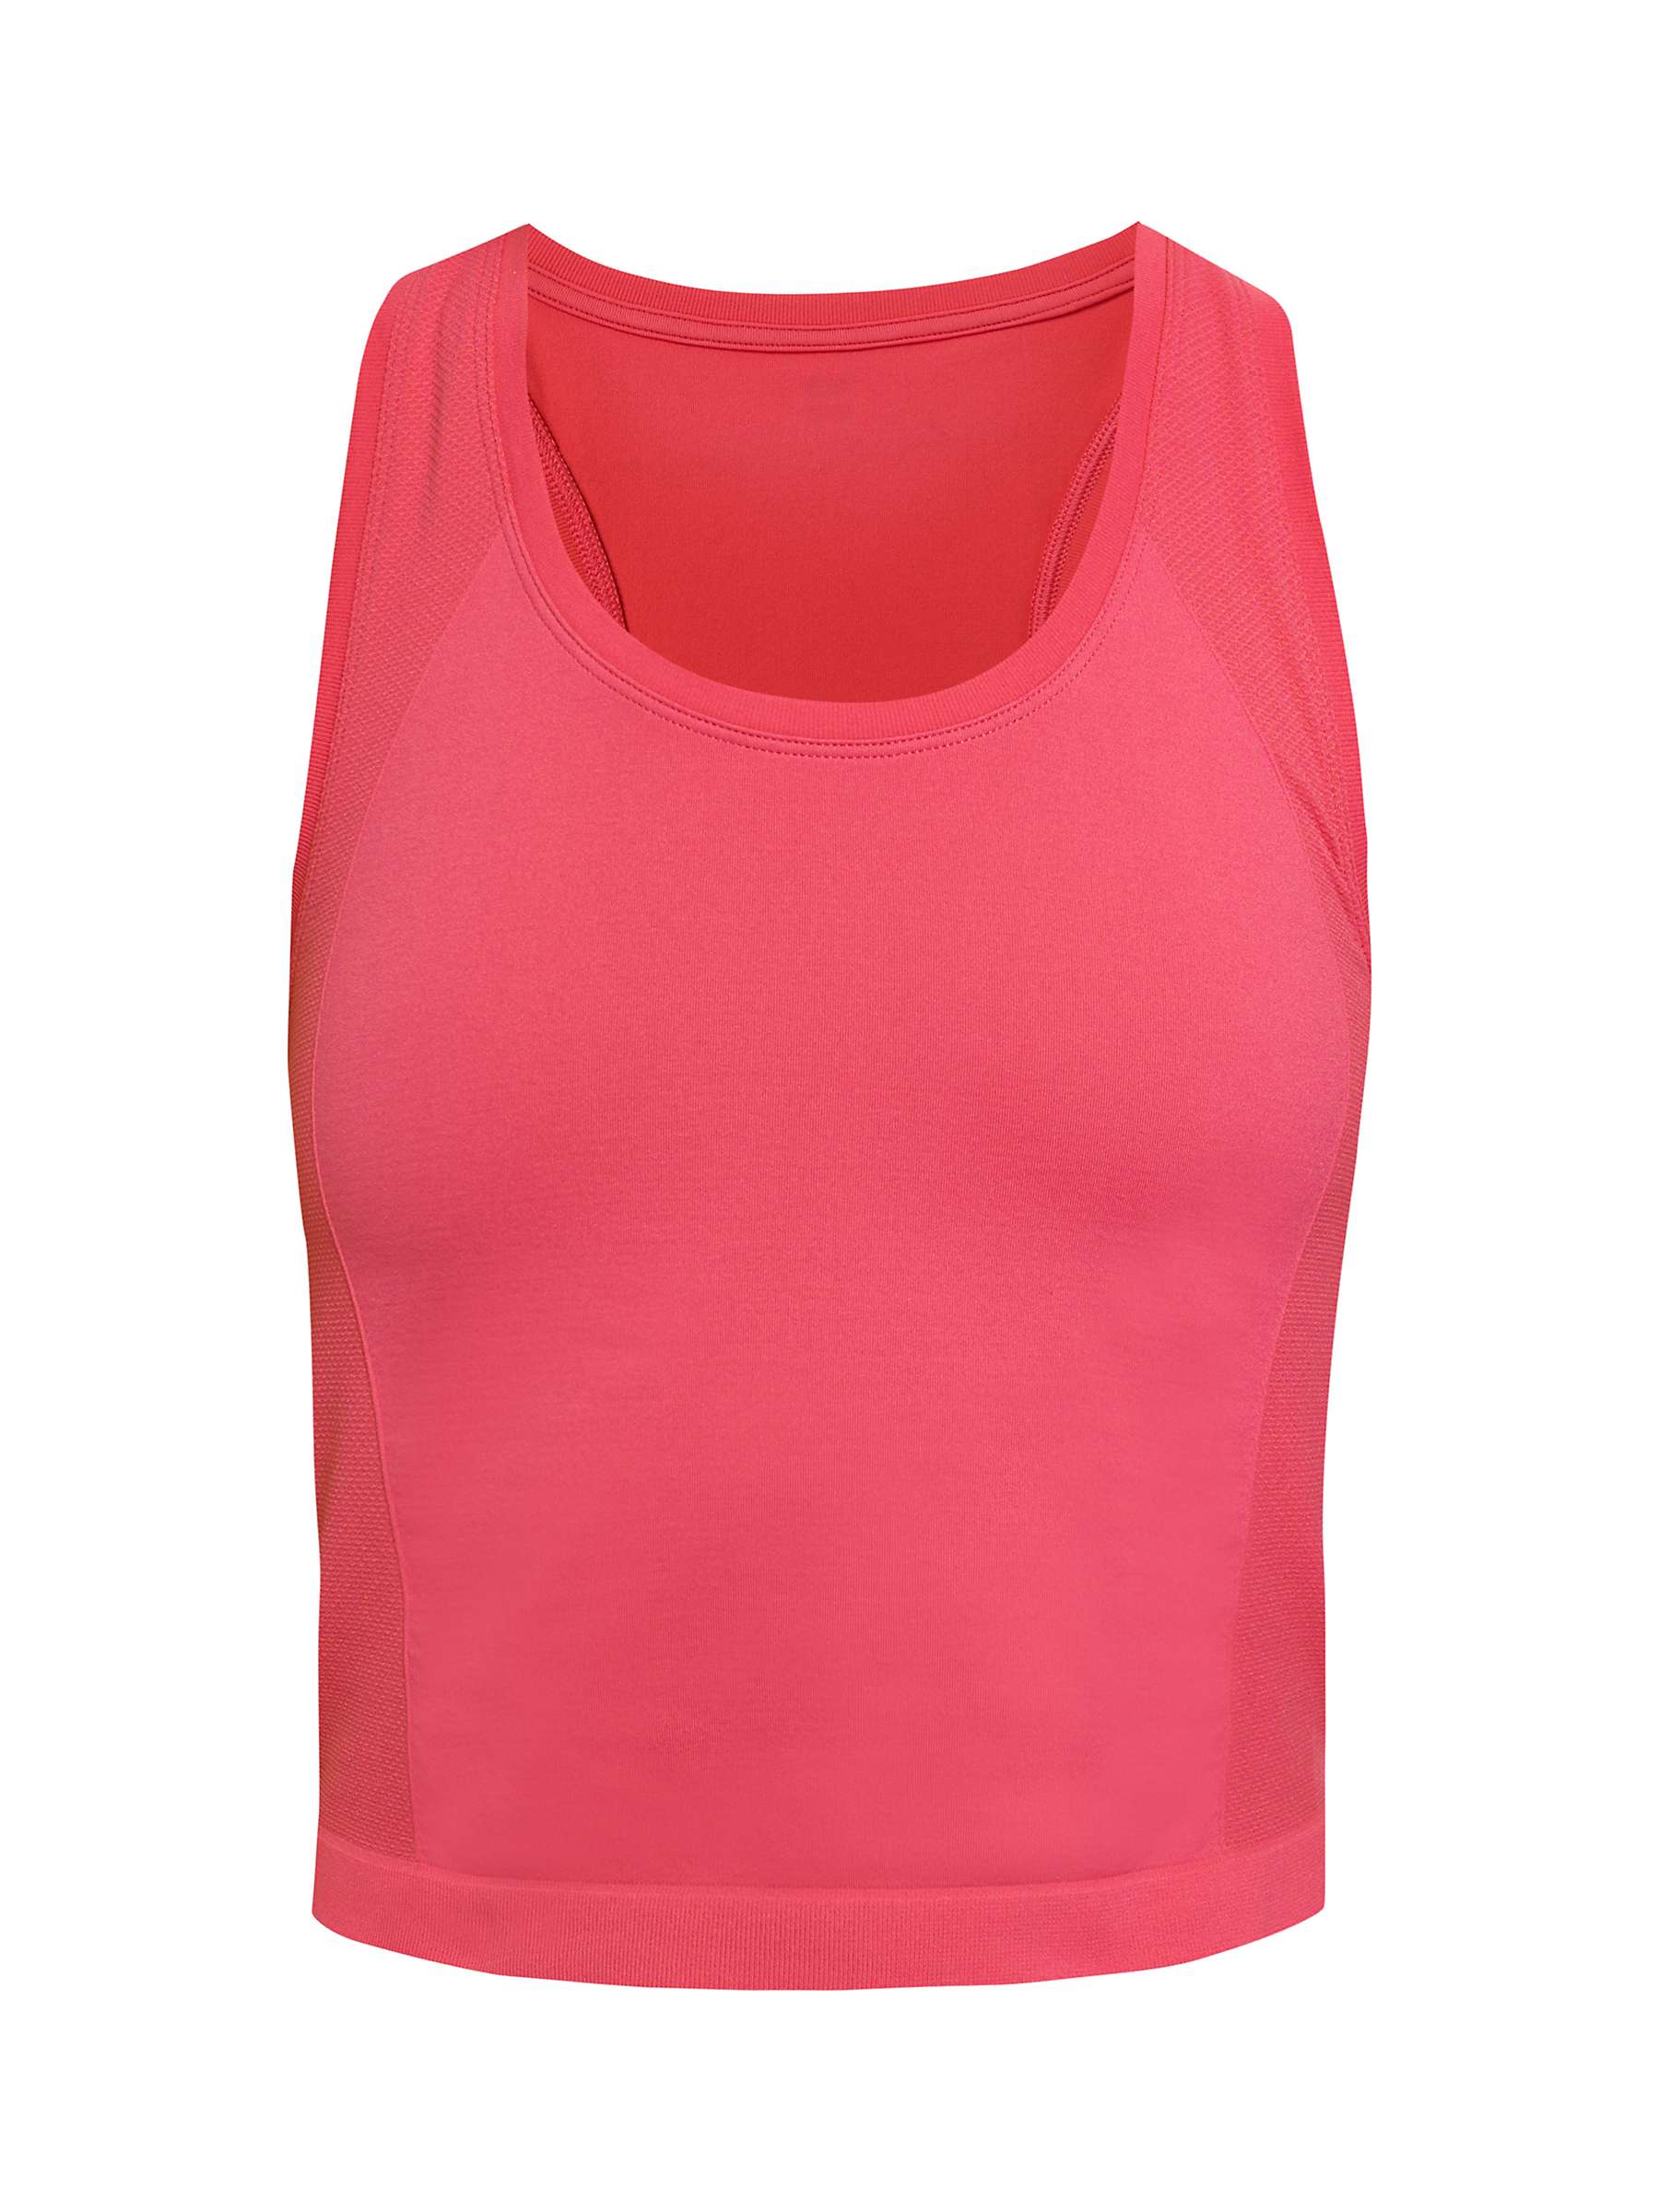 Buy Sweaty Betty Athlete Crop Seamless Workout Tank Top Online at johnlewis.com